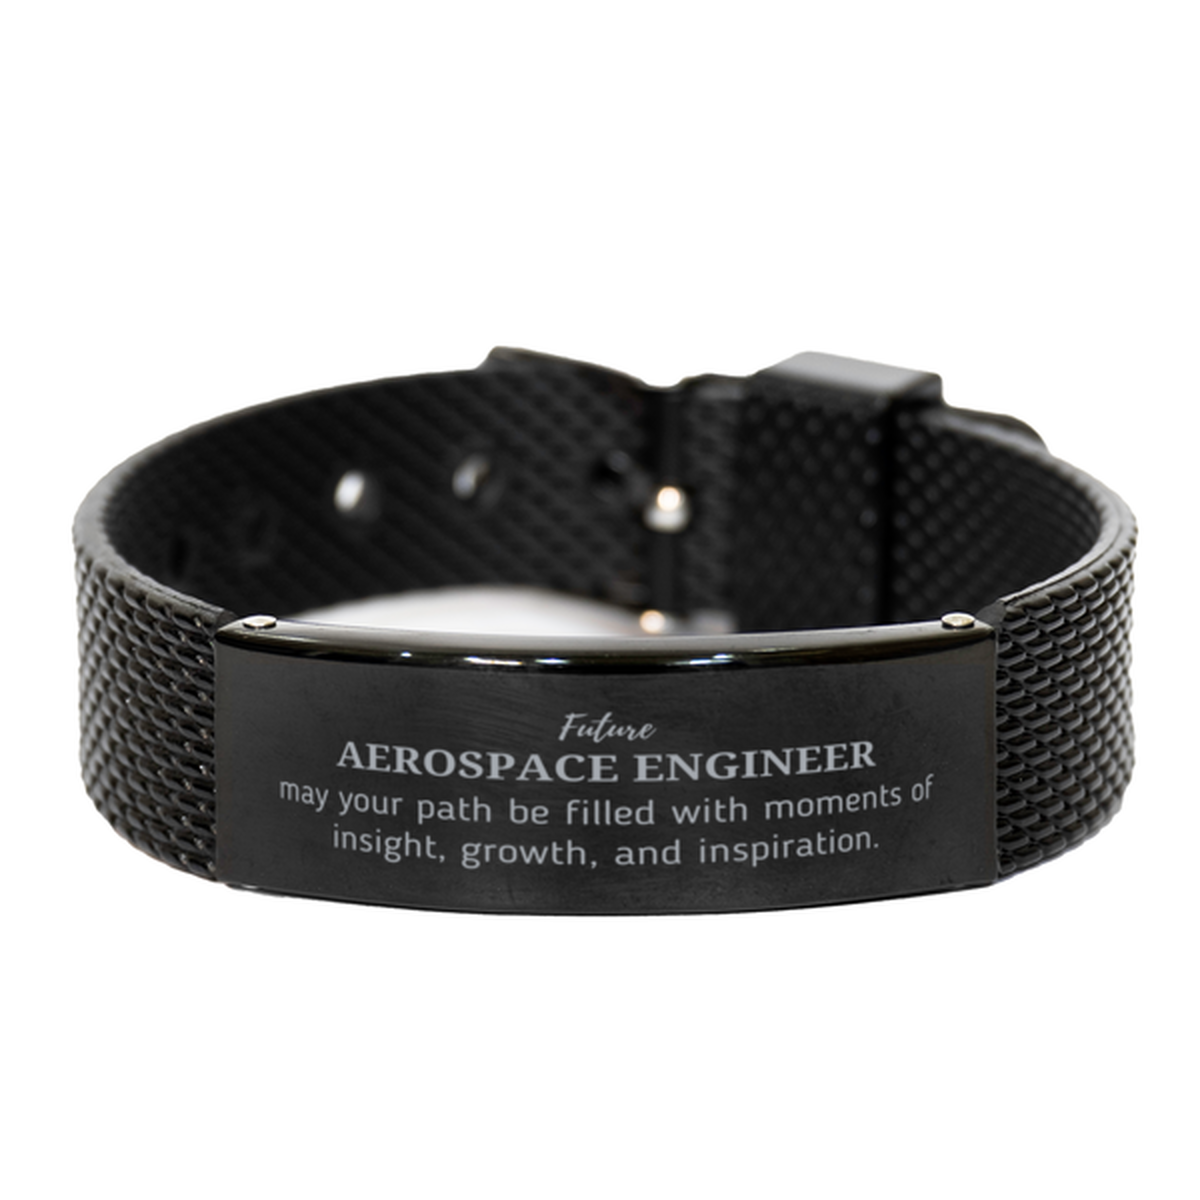 Future Aerospace Engineer Gifts, May your path be filled with moments of insight, Graduation Gifts for New Aerospace Engineer, Christmas Unique Black Shark Mesh Bracelet For Men, Women, Friends